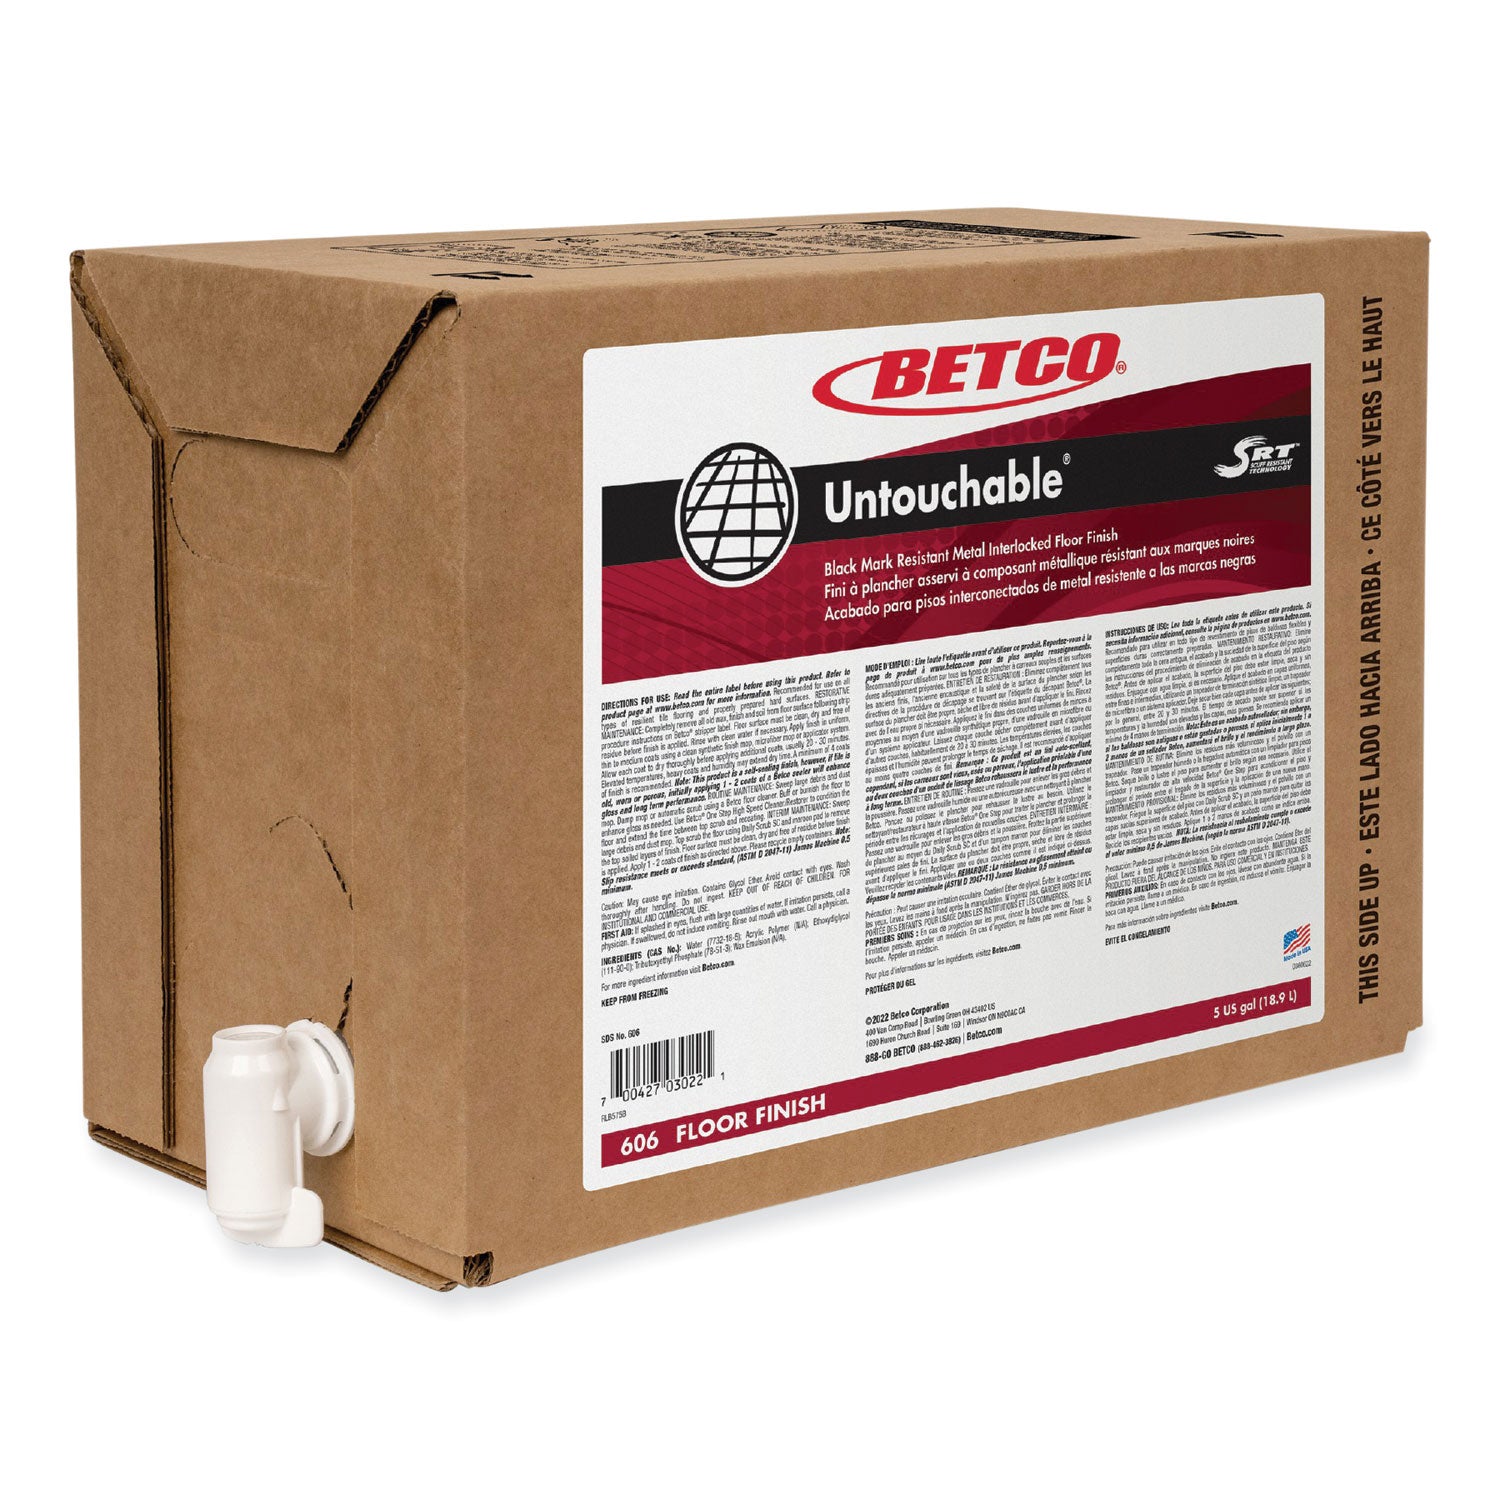 untouchable-floor-finish-with-srt-5-gal-bag-in-box_bet606b500 - 1